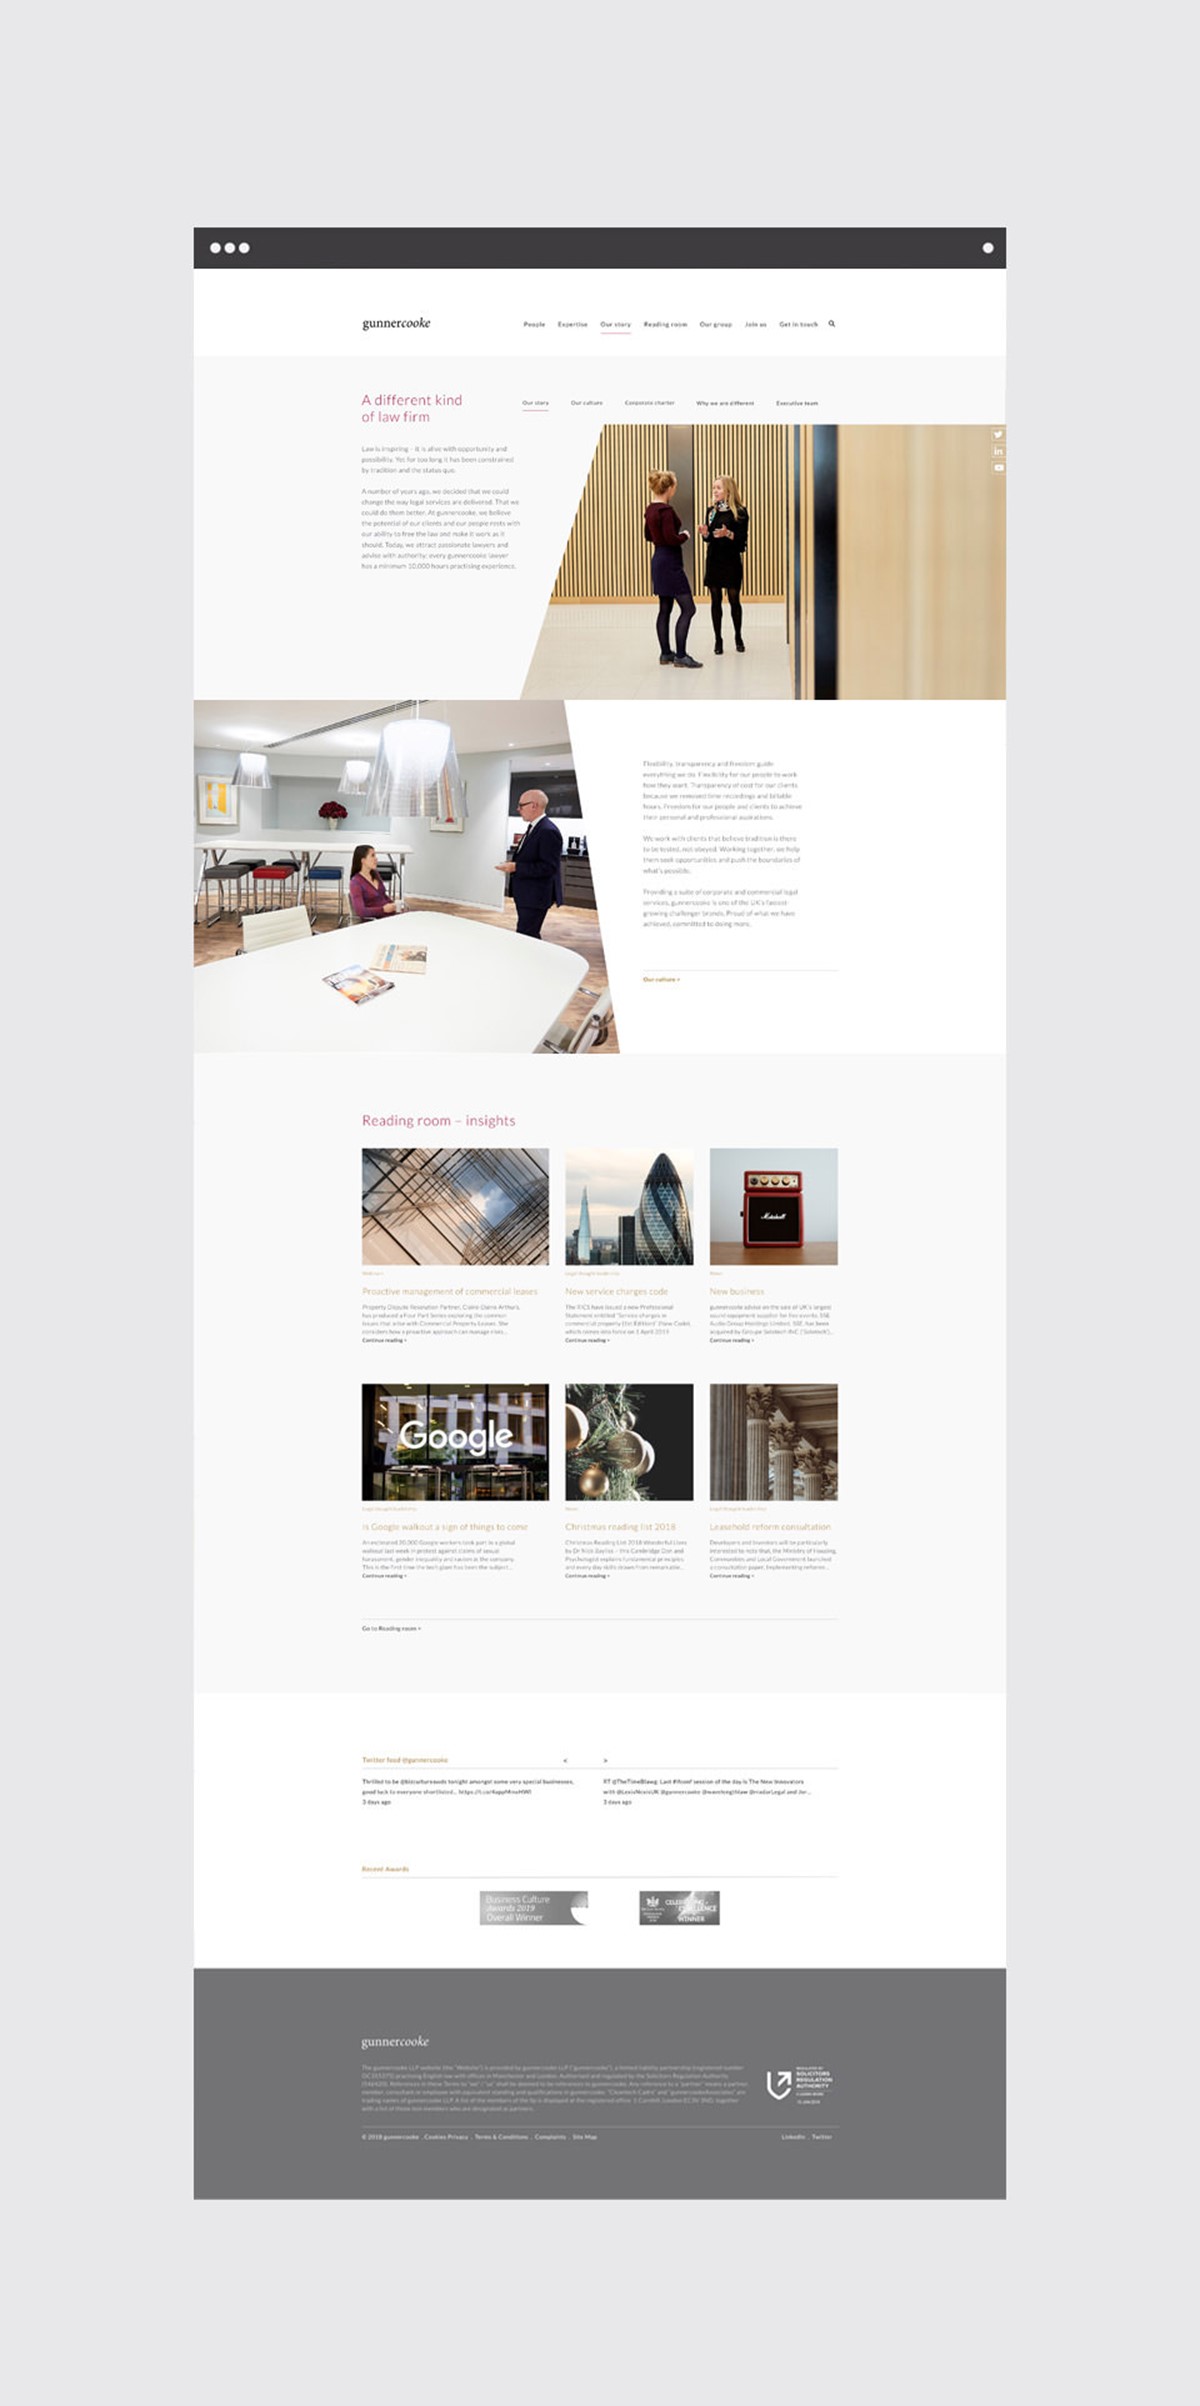 Gunnercooke. Law firm. About page. Website design by Superfried.